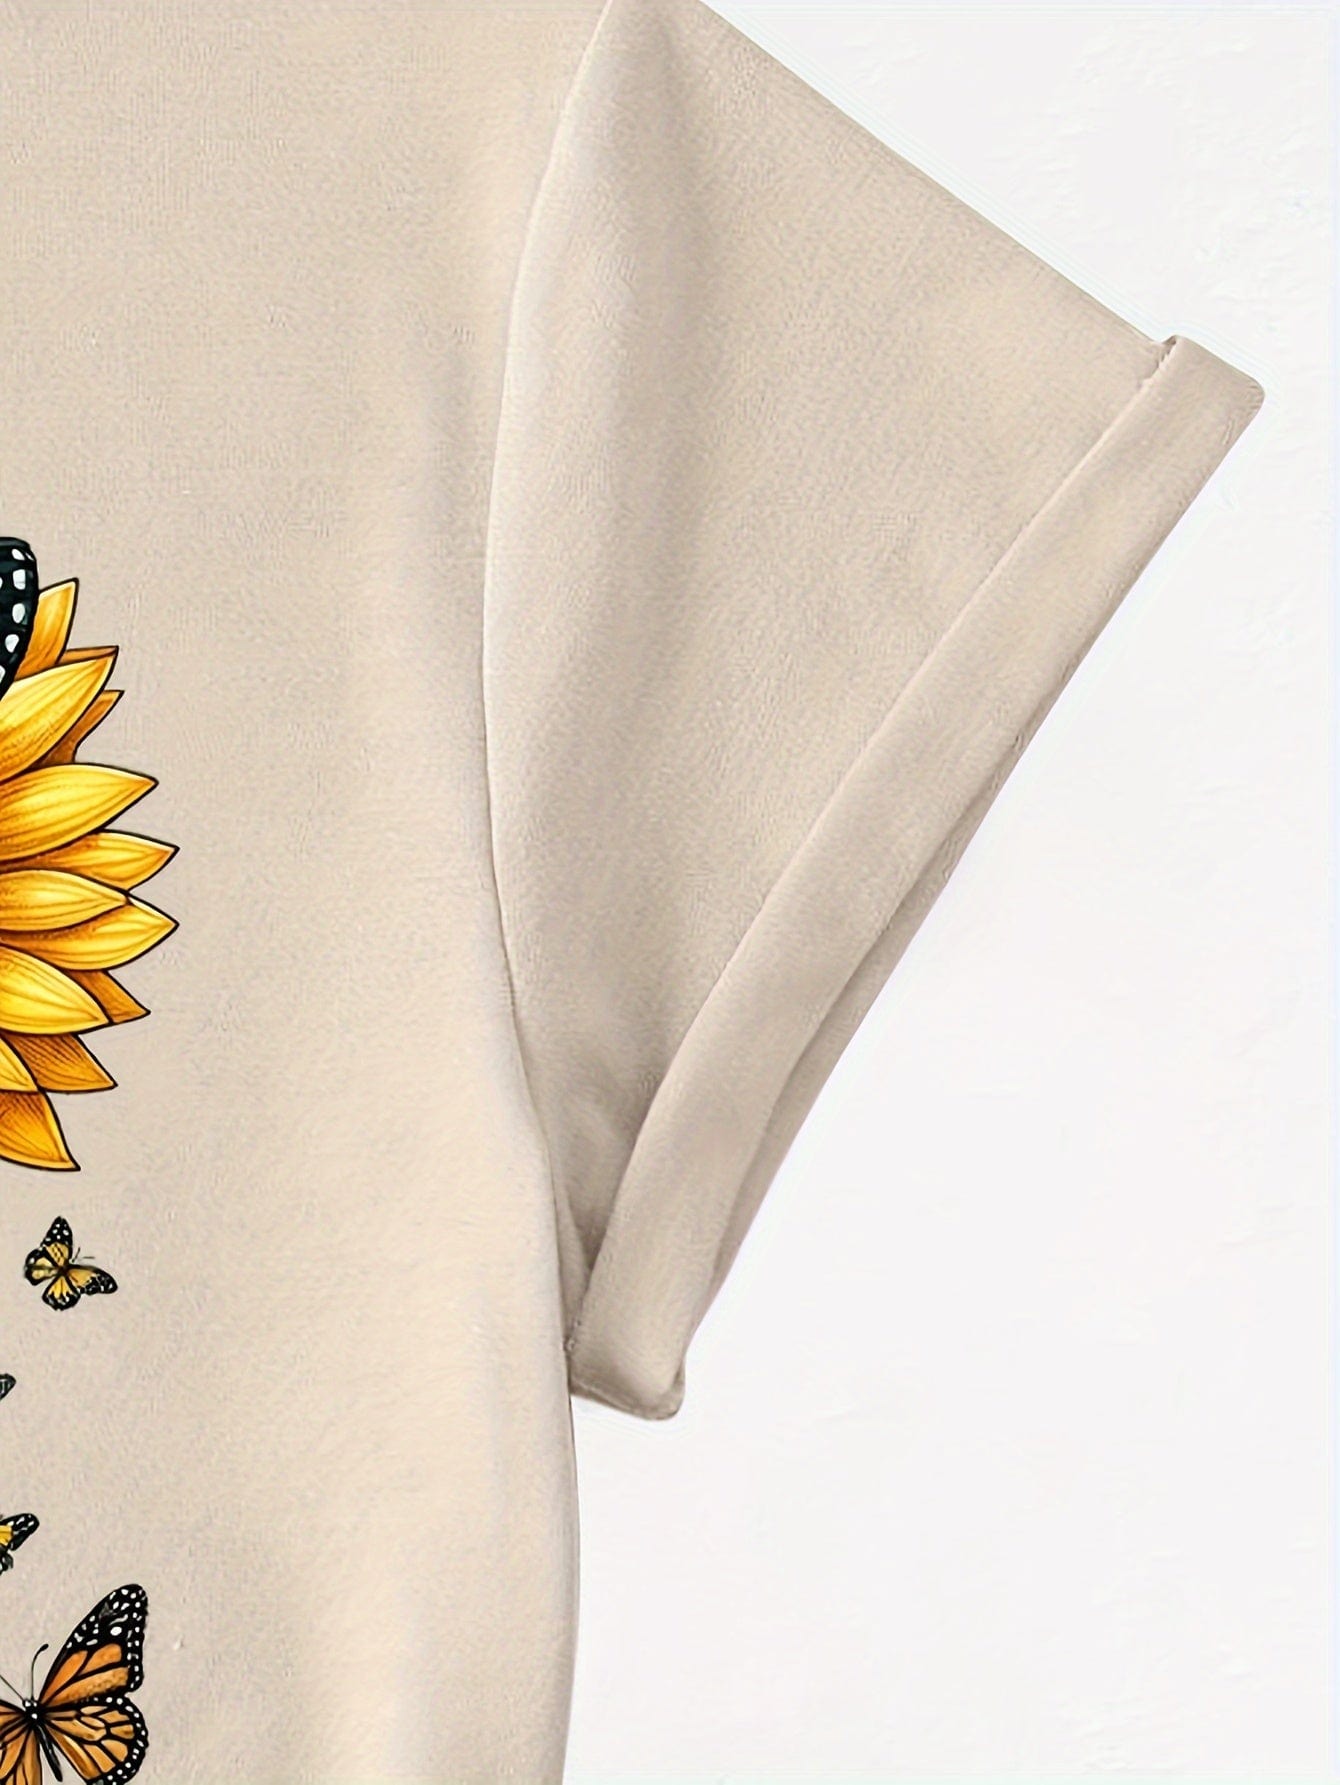 Sunflower and Butterfly Graphic Tee, Women's Casual Crew Neck Short Sleeve Shirt for Spring and Summer